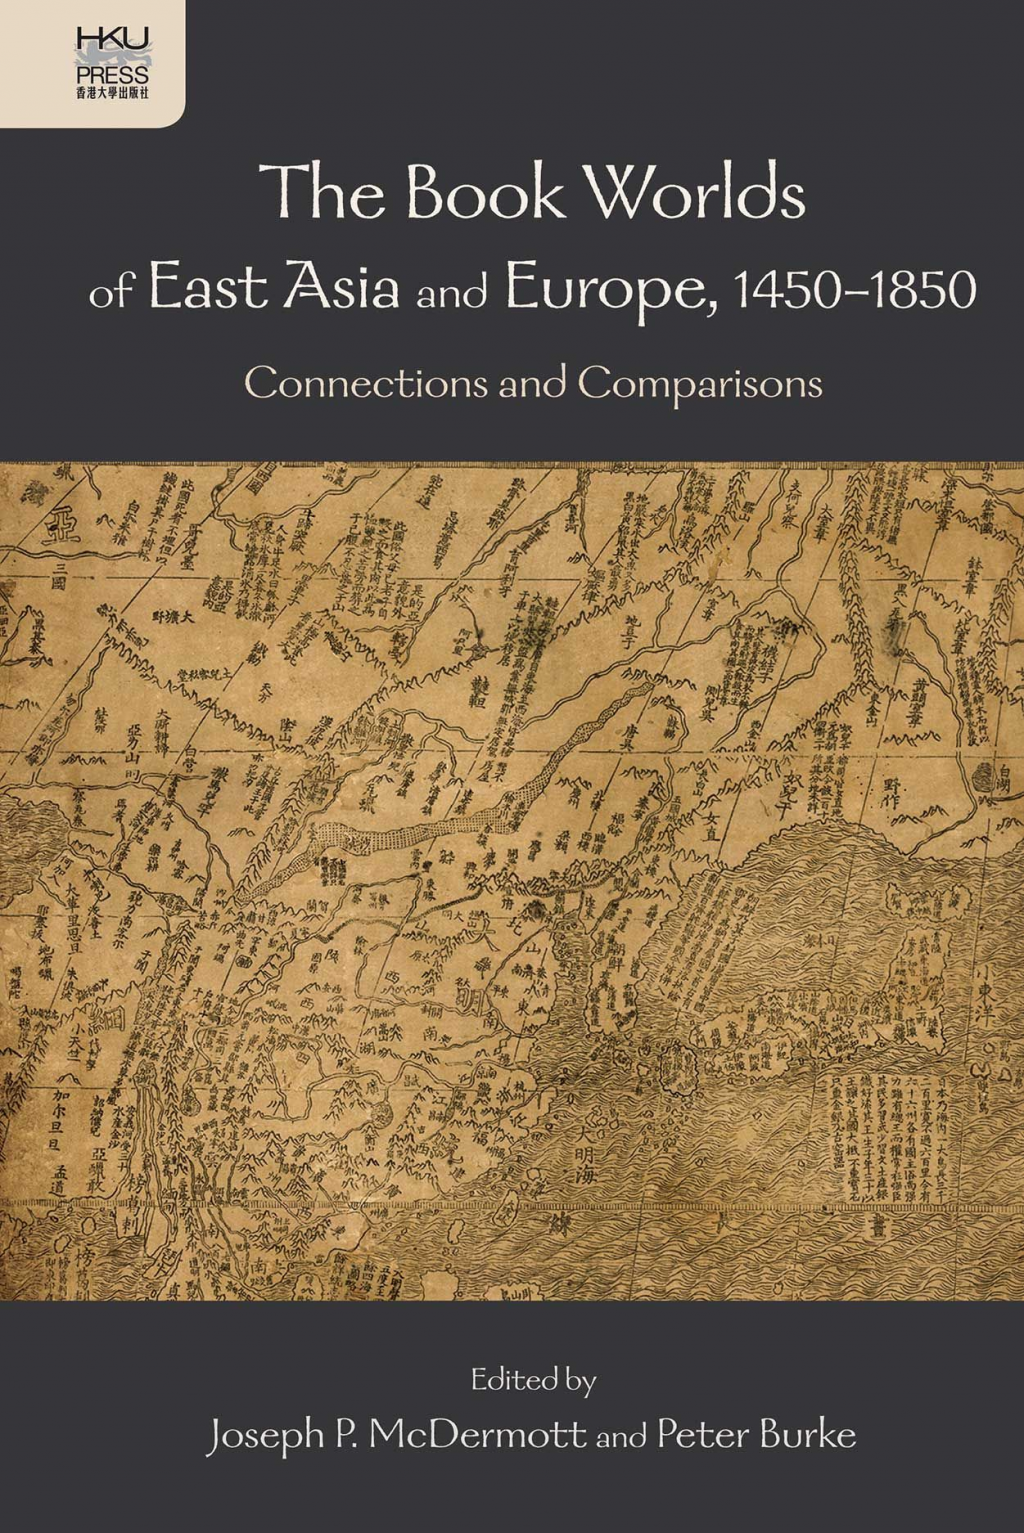  New Book Release - The Book Worlds of East Asia and Europe, 1450-1850